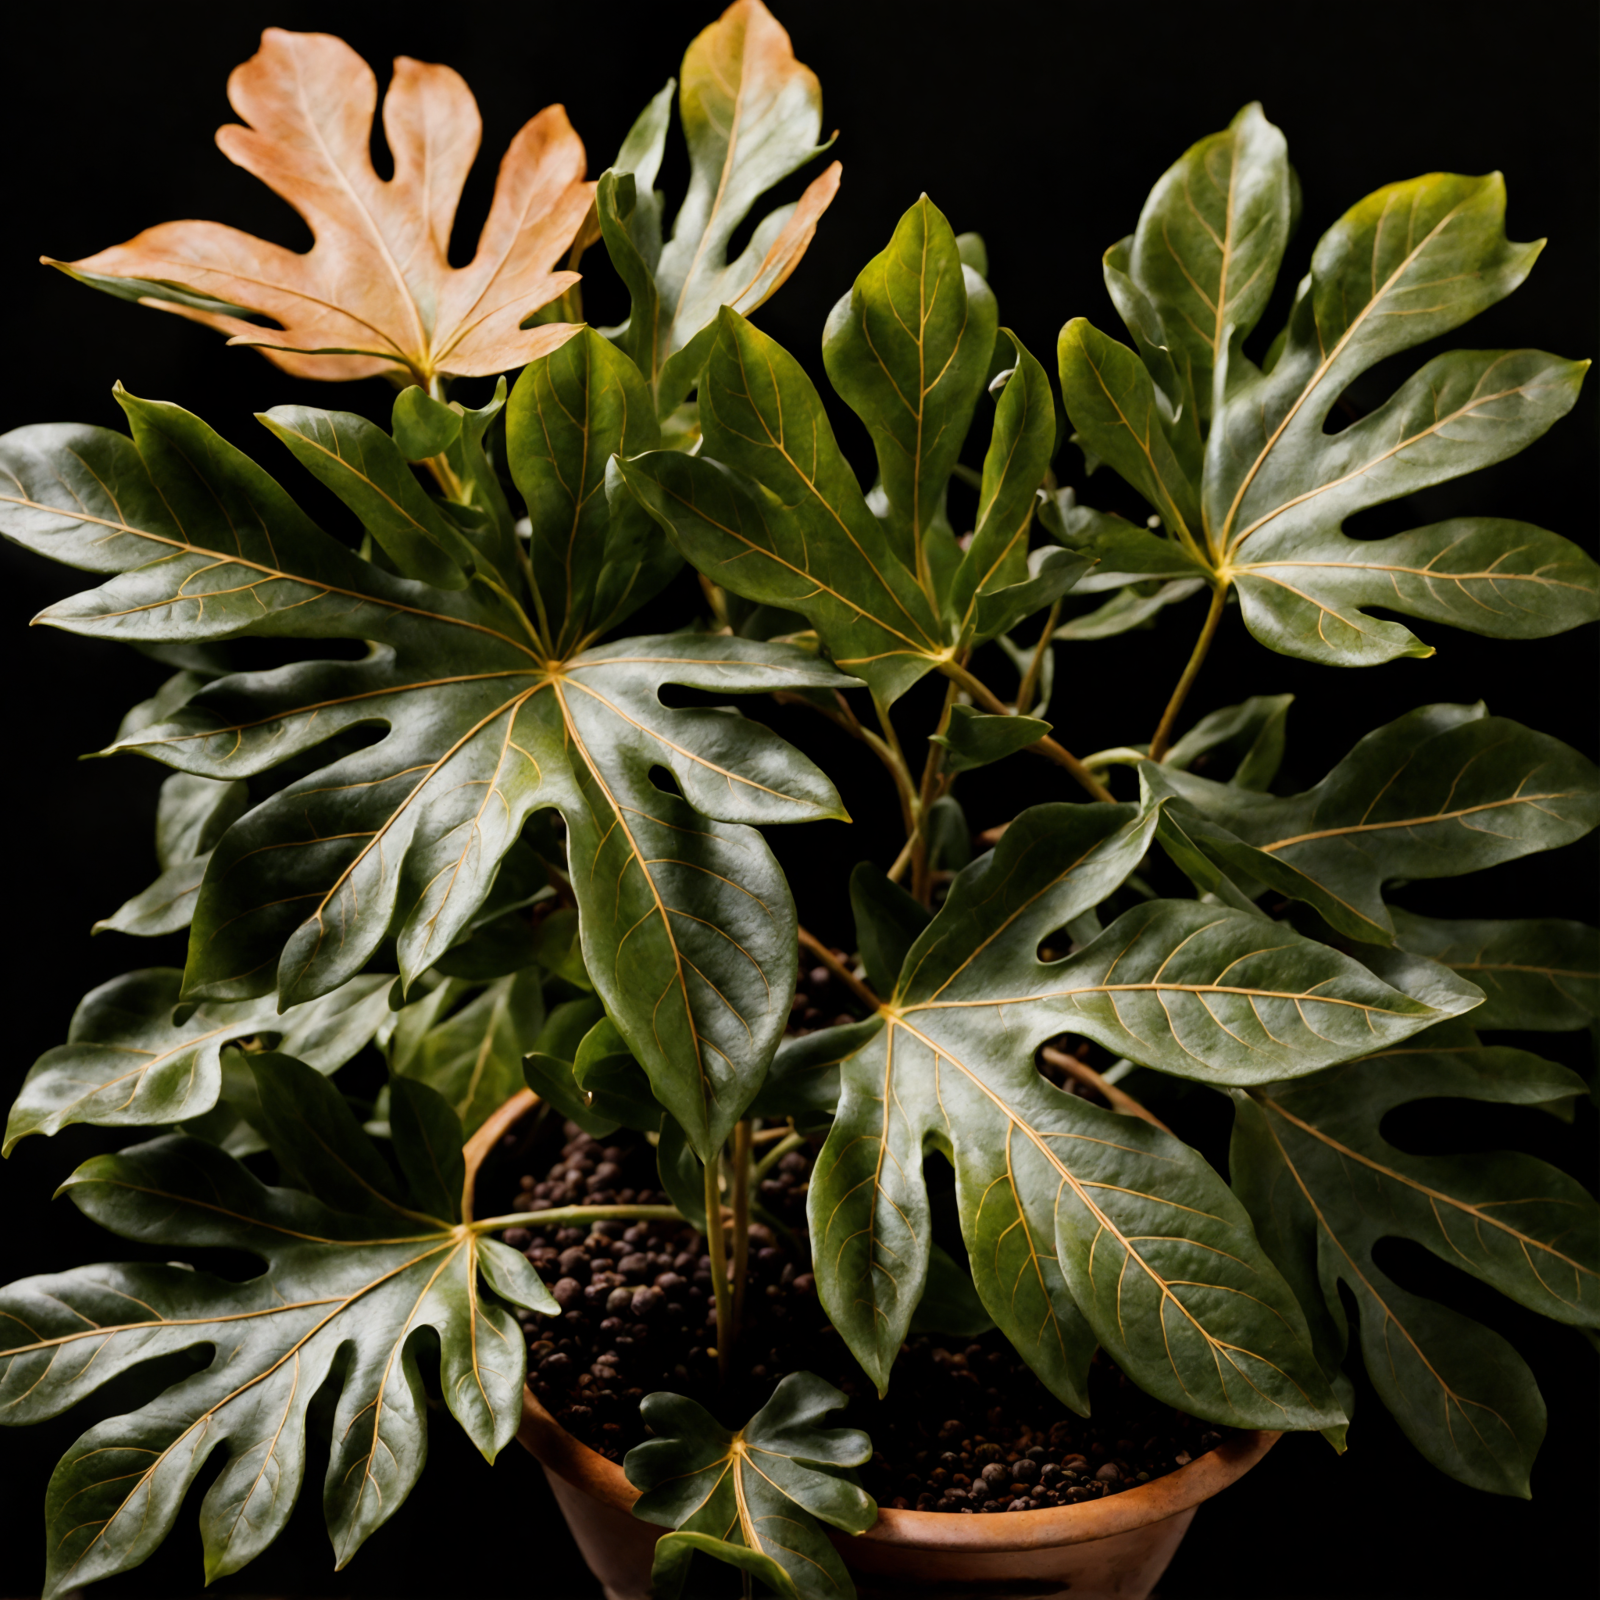 Fatsia japonica in a planter, with glossy leaves, part of indoor decor, clear lighting, against a dark background.